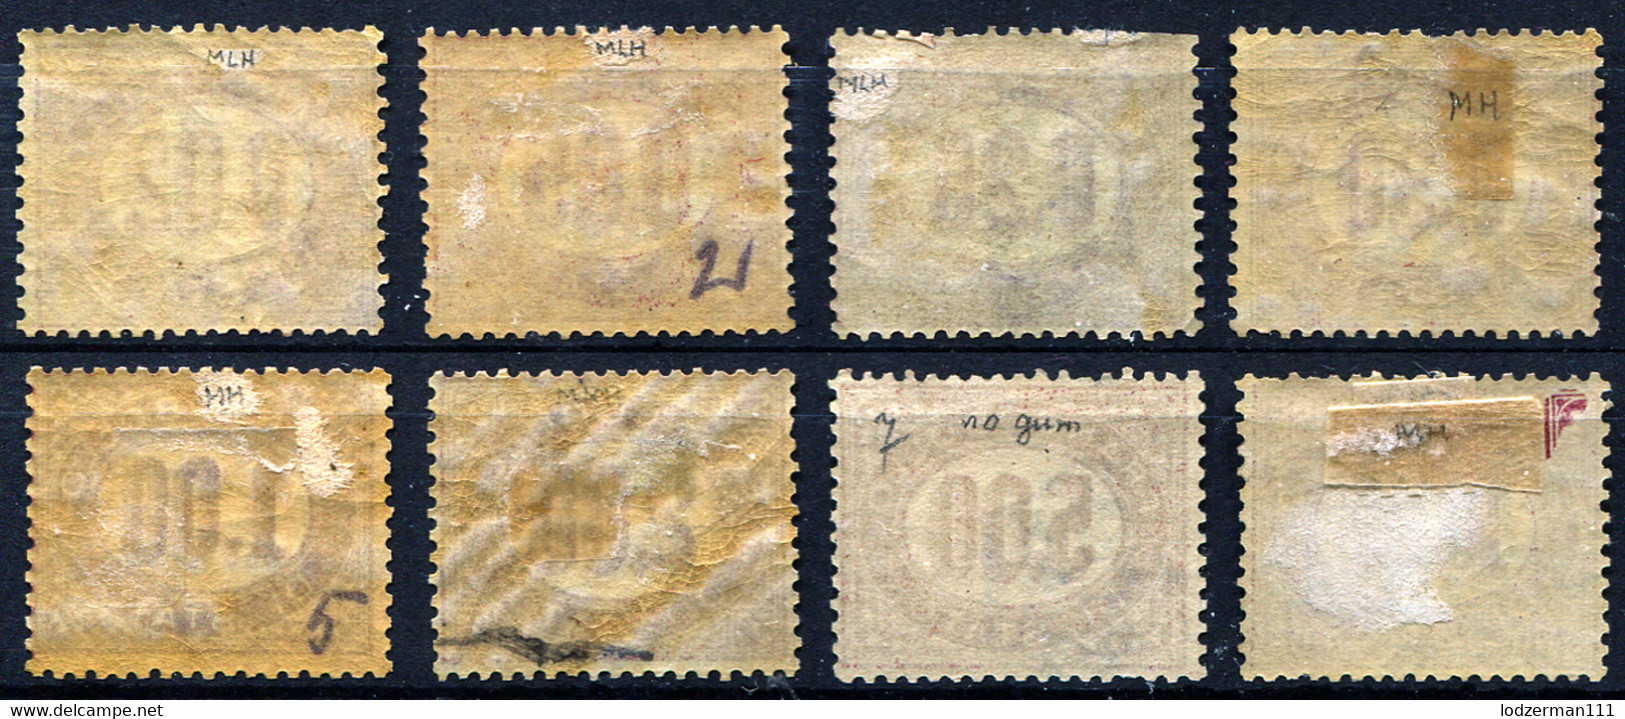 ITALY Official 1875 - Mi.Dienst 1-8 (Yv.TS 1-8, Sc.O1-8) MH-MLH (1 MNG) All VF - Service